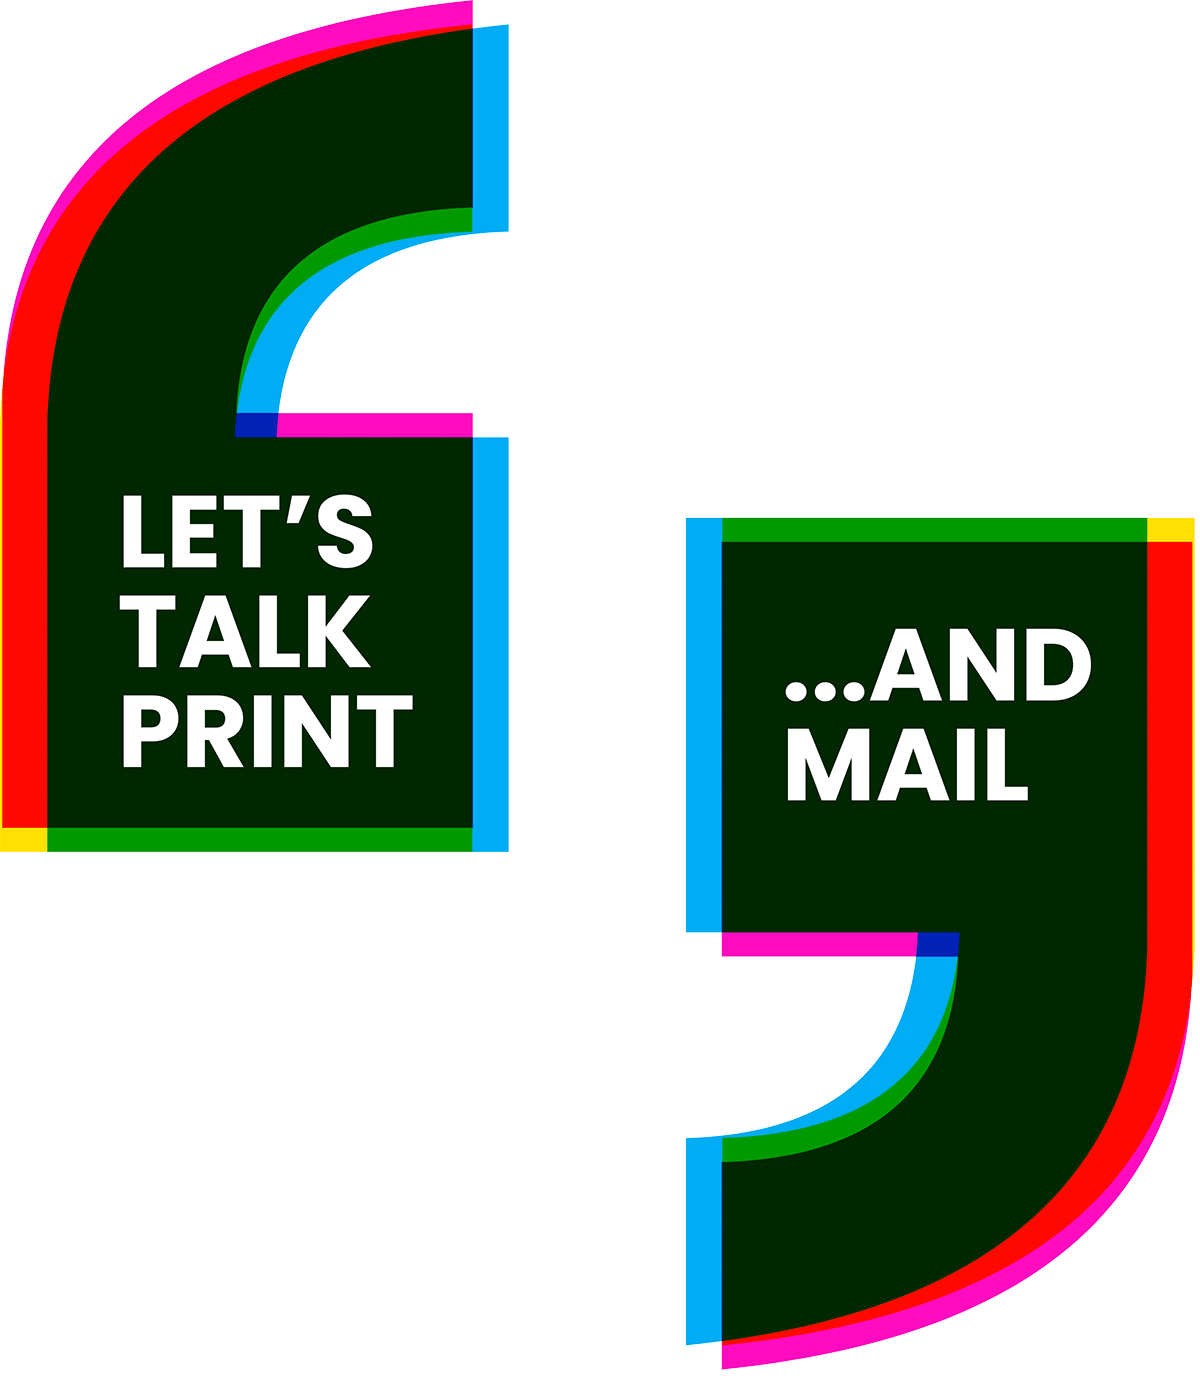 Overlapping transparent quotation marks with the word "let's talk print" and "...And Mail" situated inside. 